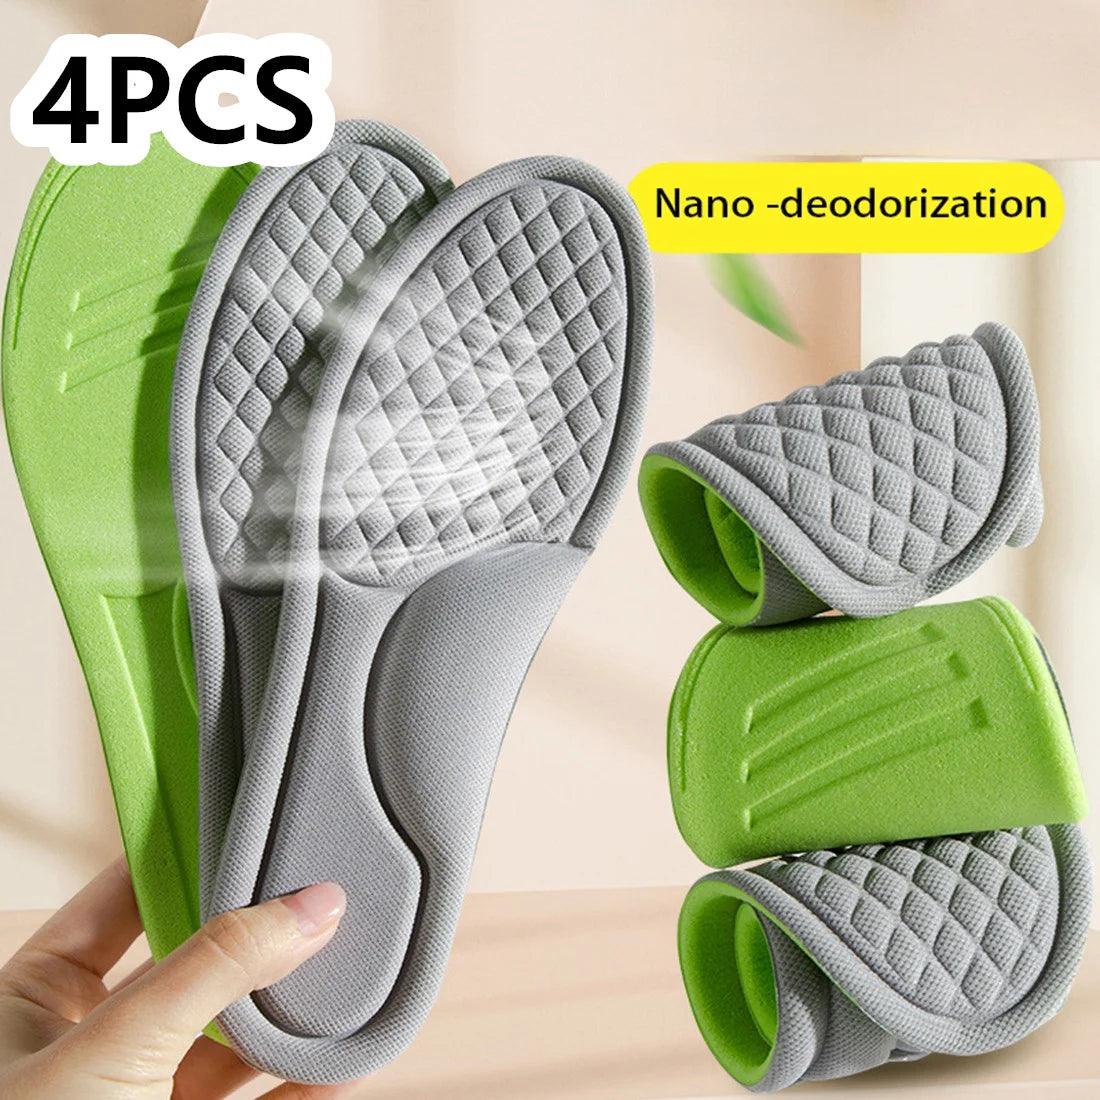 Orthopedic Memory Foam Sports Insoles with Odor Control and Sweat Absorption  ourlum.com   